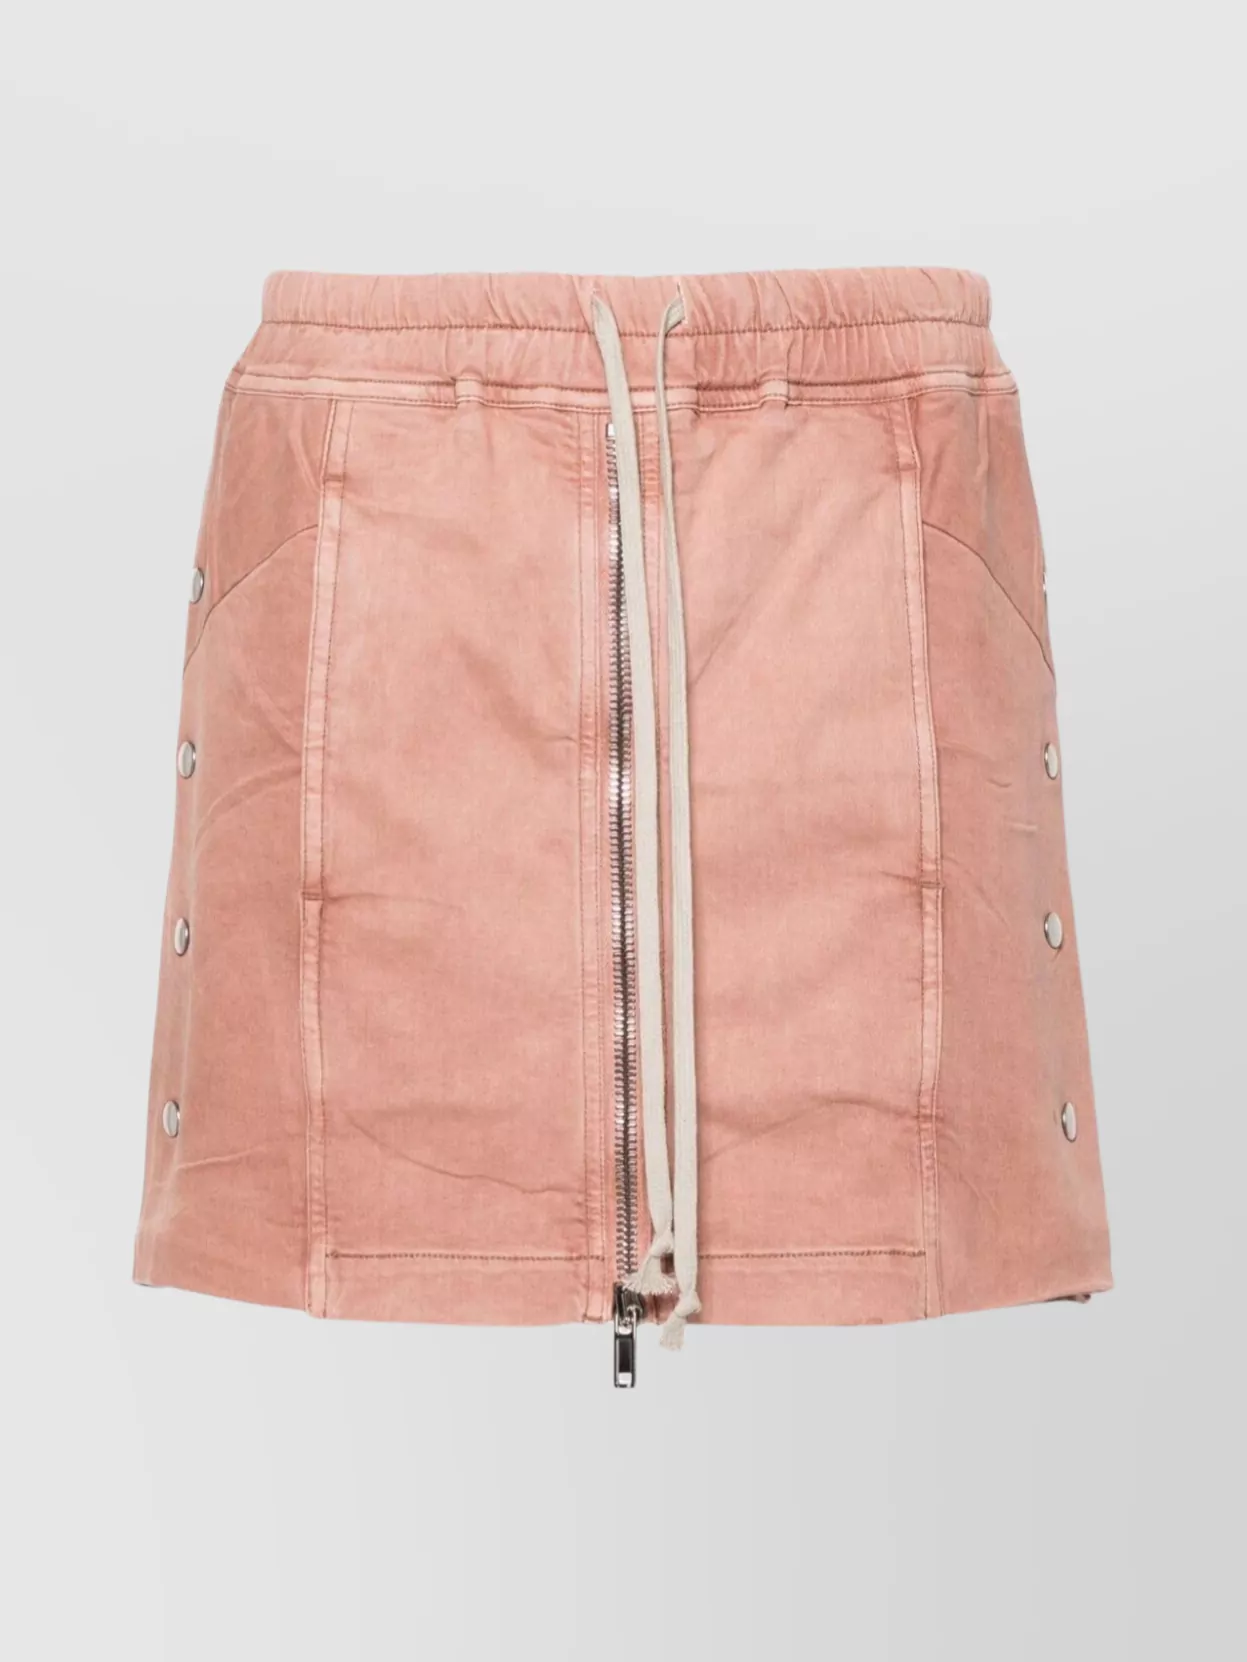 Shop Rick Owens Drkshdw Mini Skirt With Elastic Waistband And Side Button